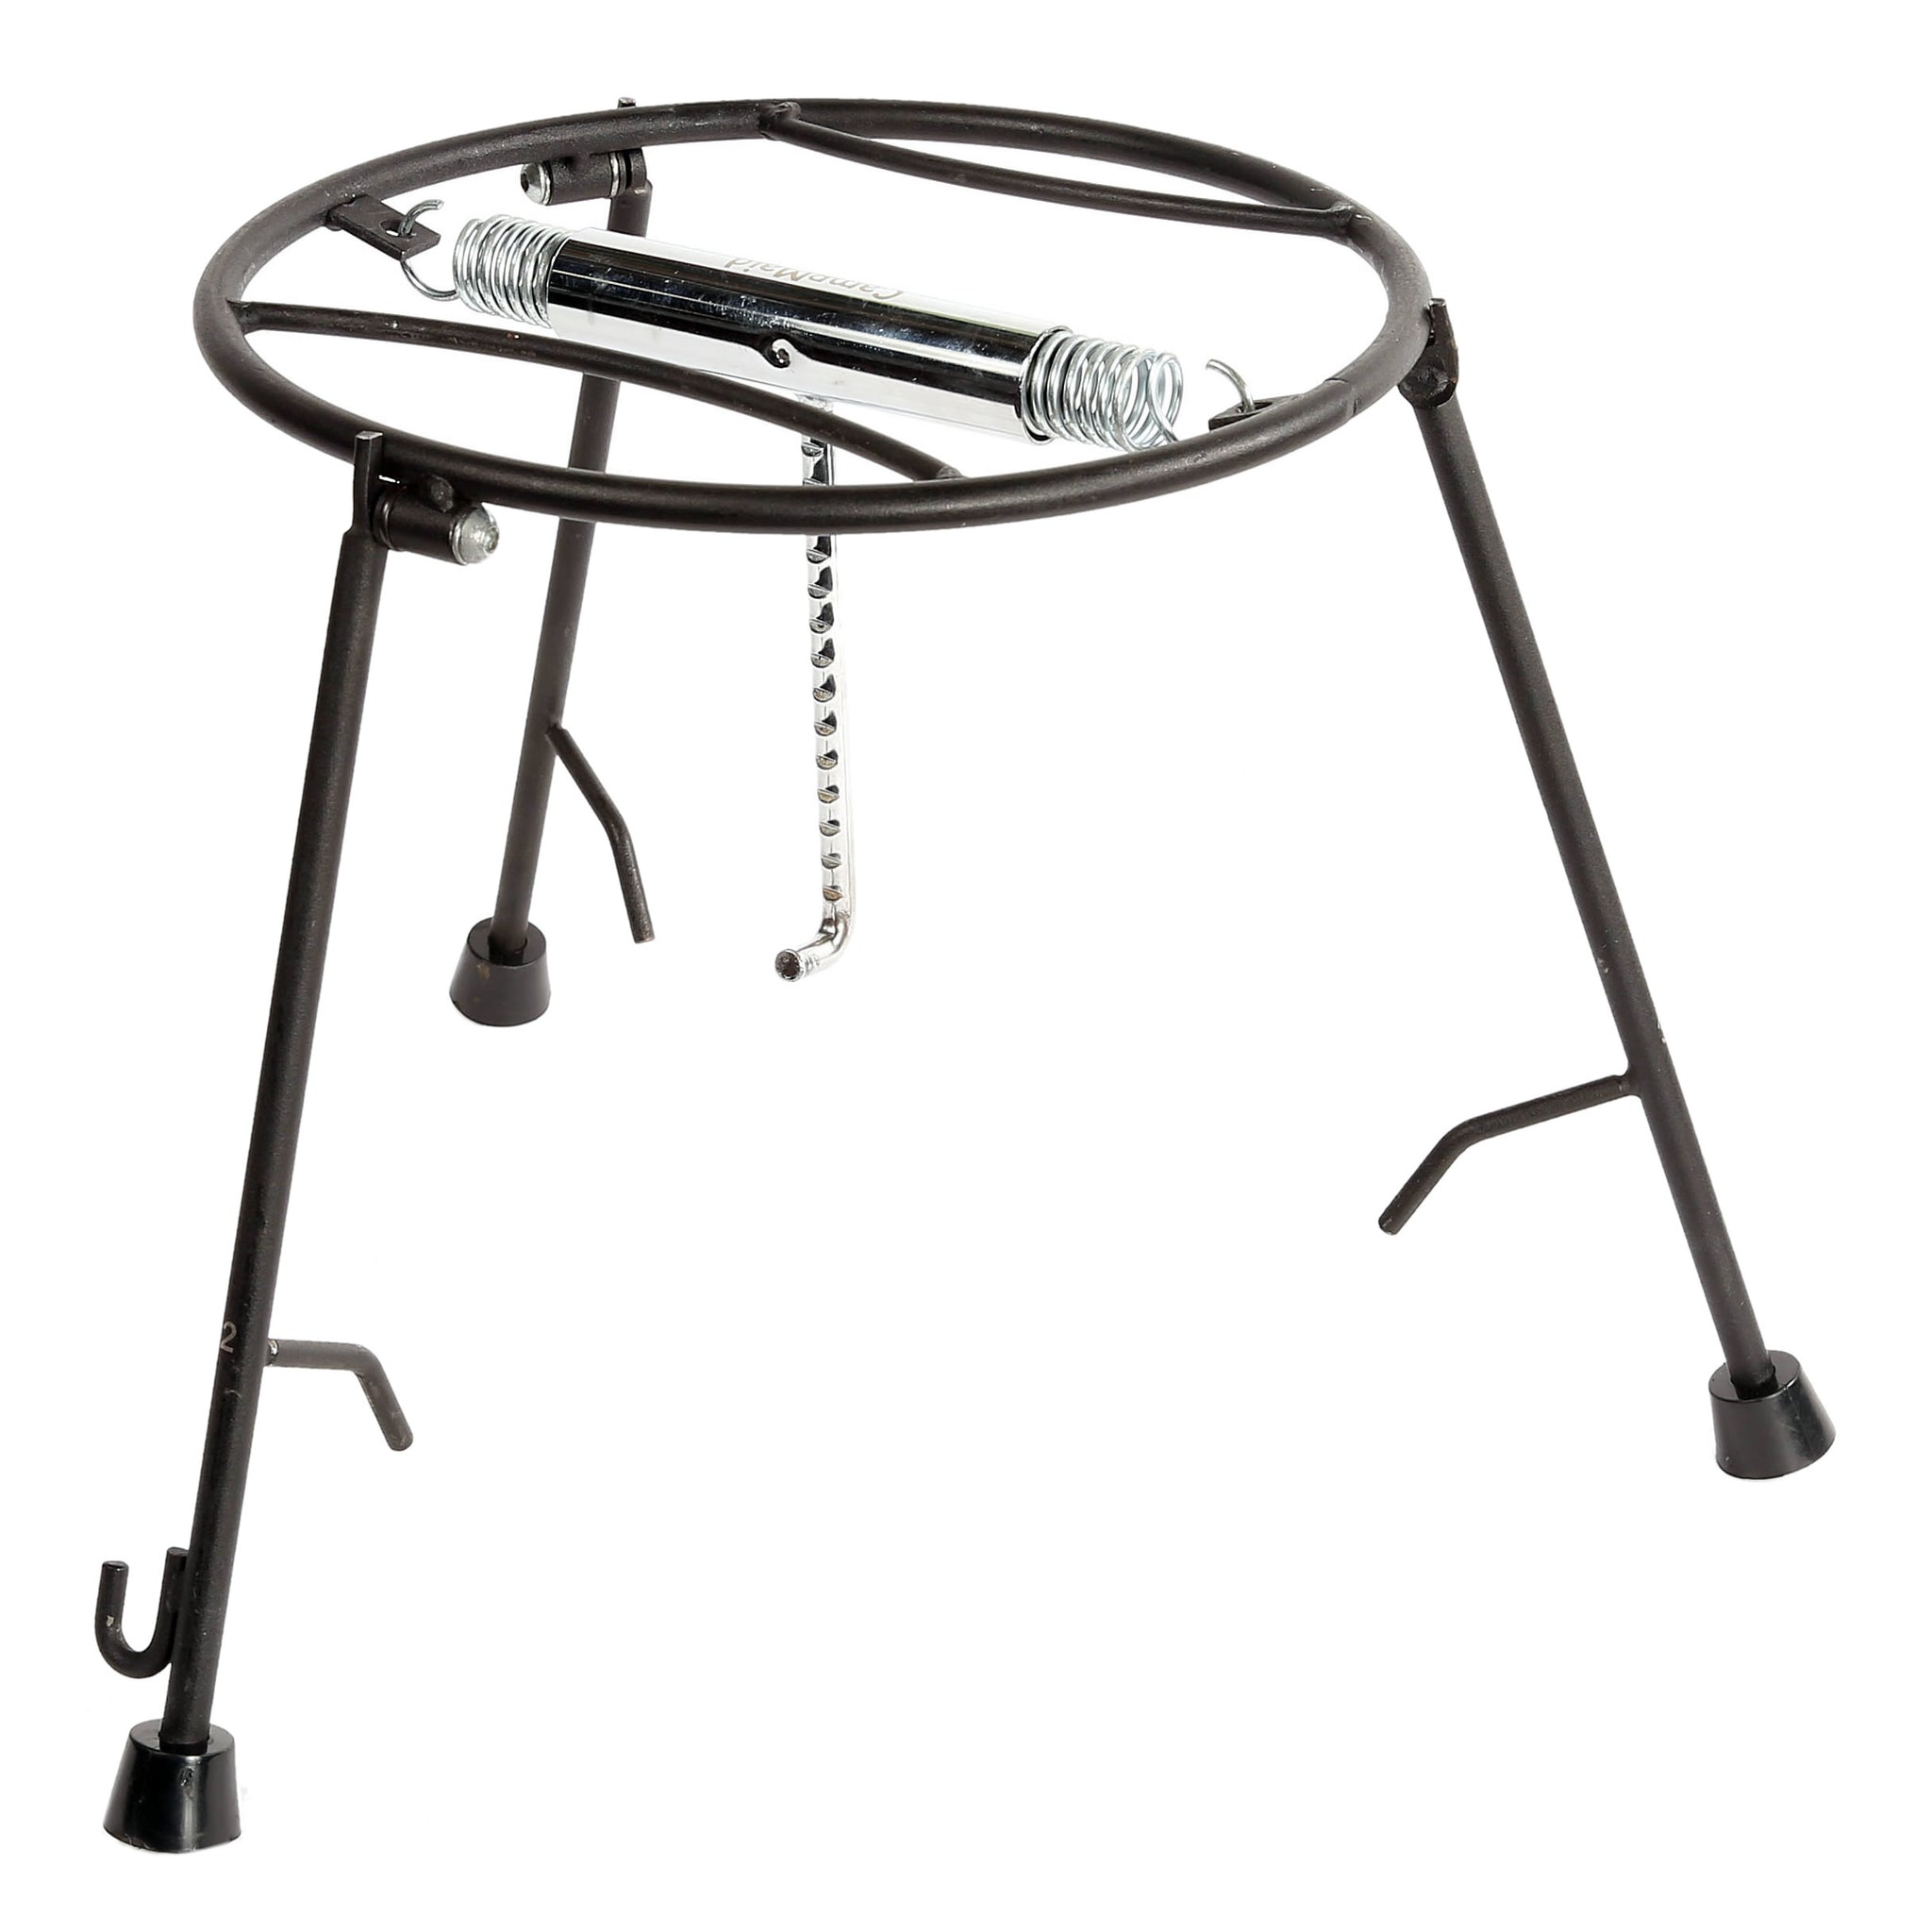 Dutch Oven Lid Lifter - 14” and More